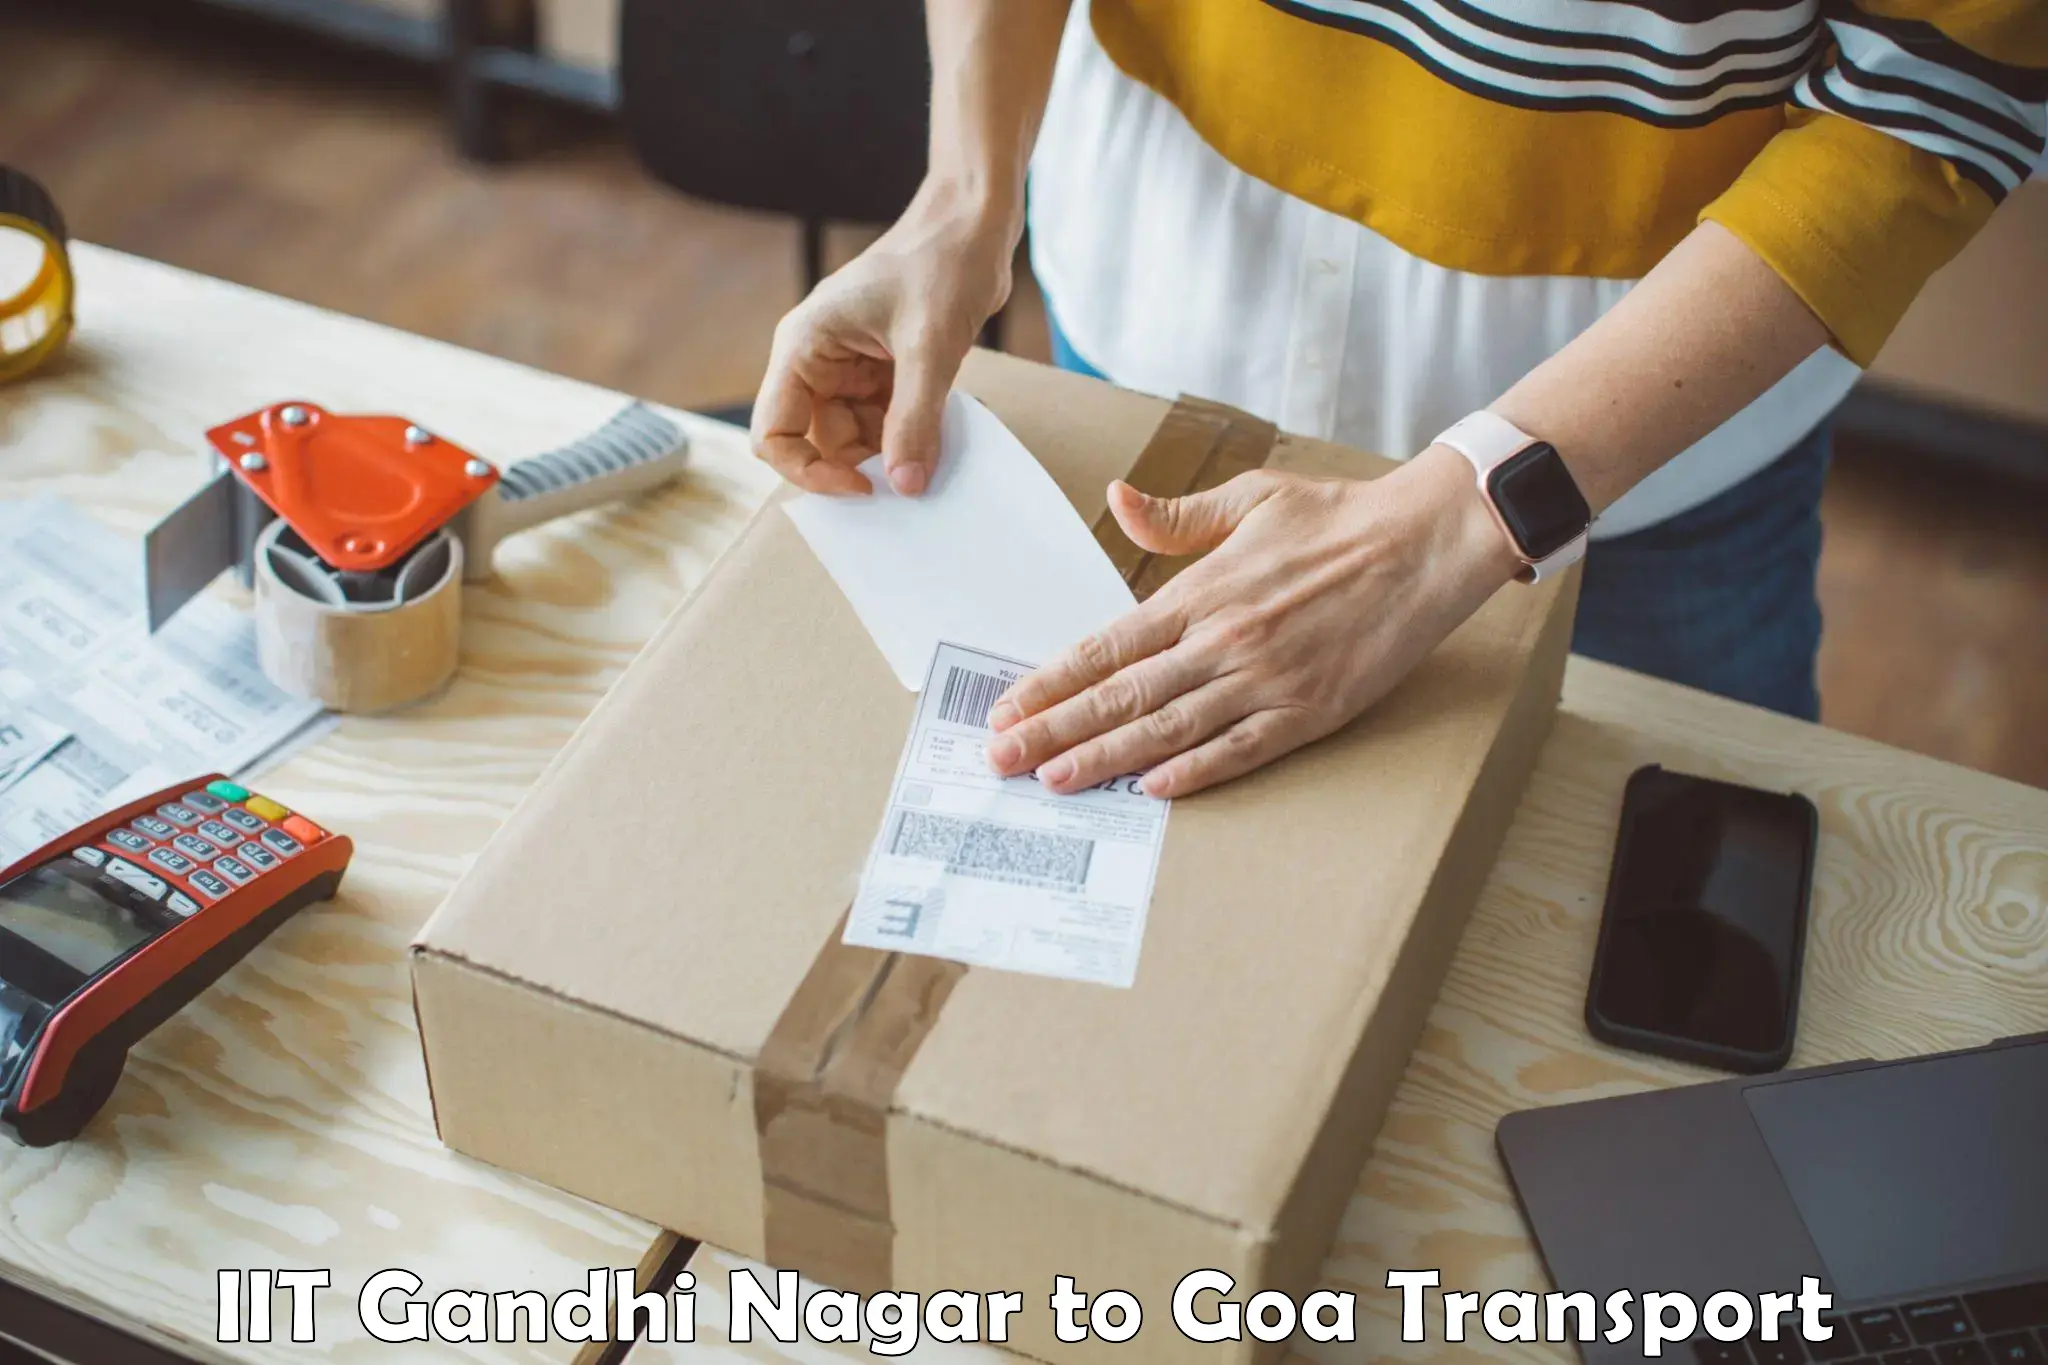 Transport bike from one state to another IIT Gandhi Nagar to Goa